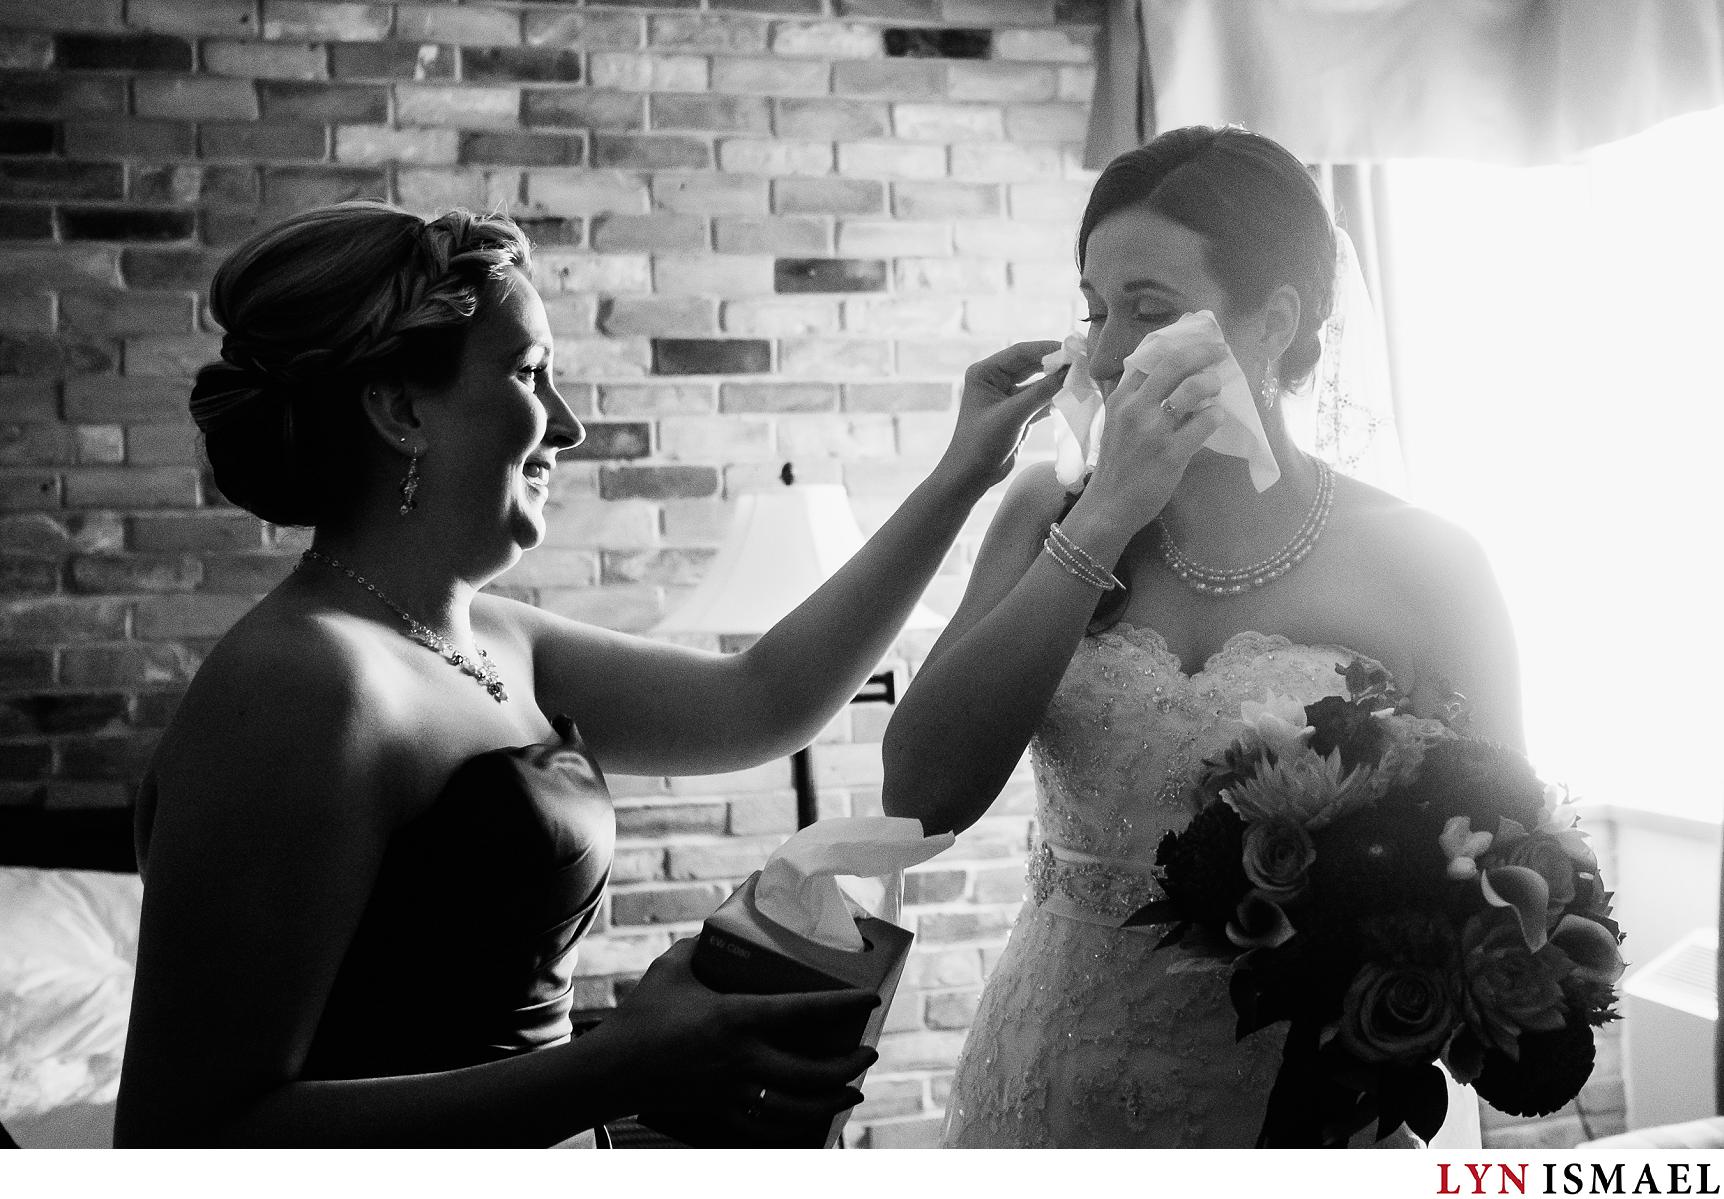 Bride's sister give napkin for the bride to wipe her tears away